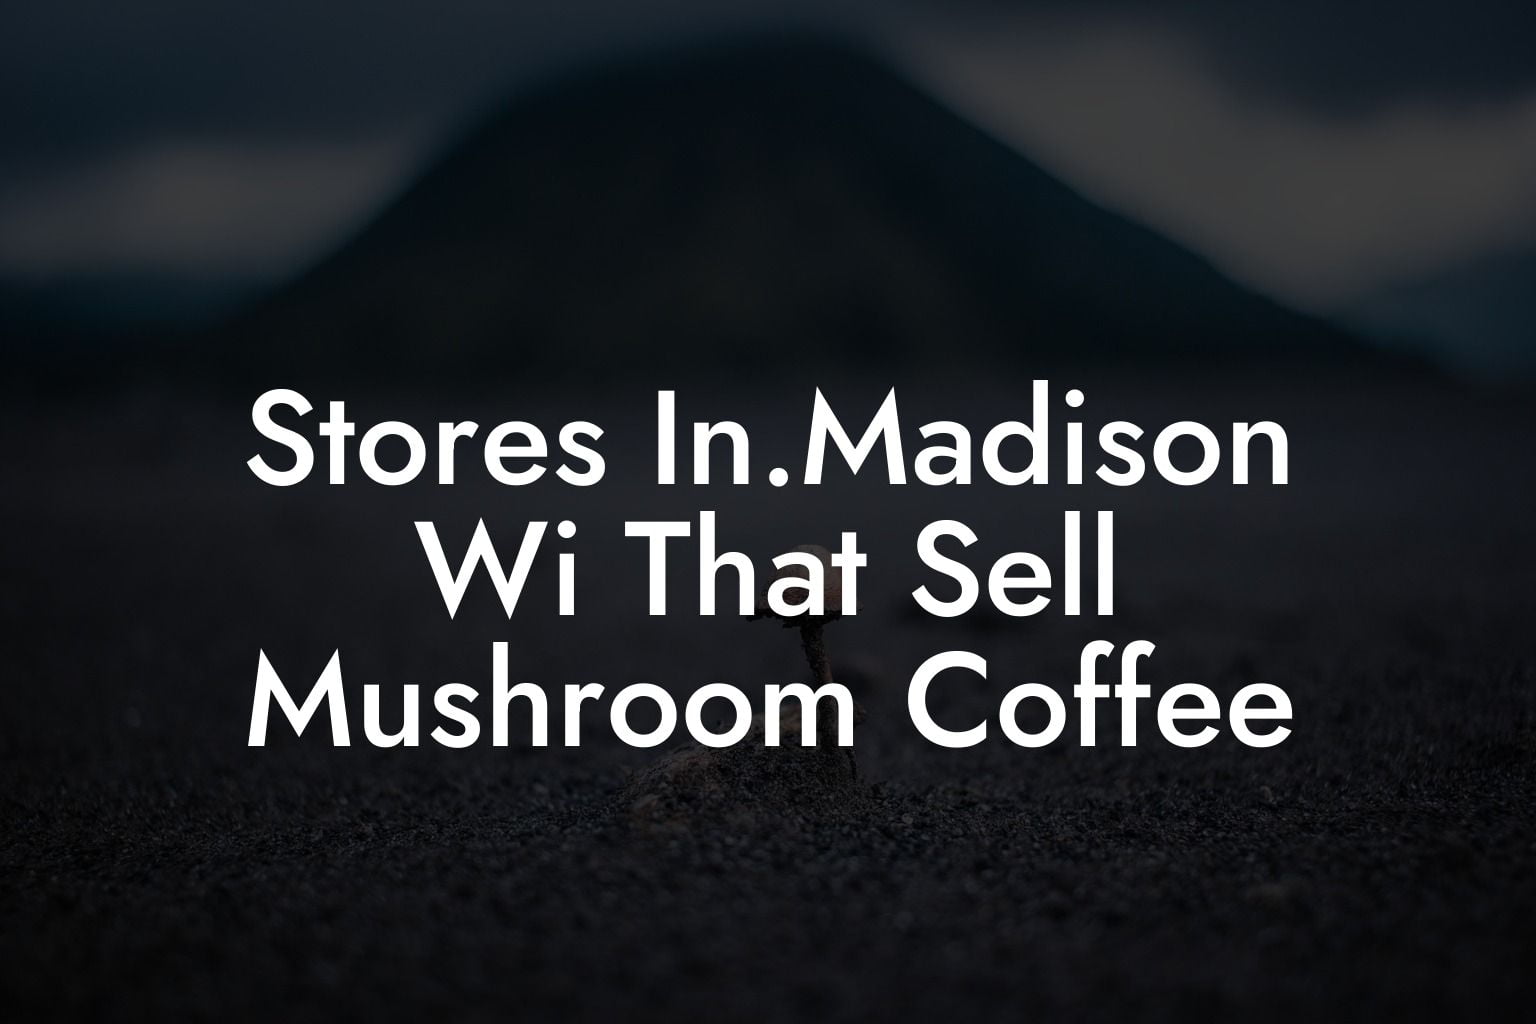 Stores In.Madison Wi That Sell Mushroom Coffee